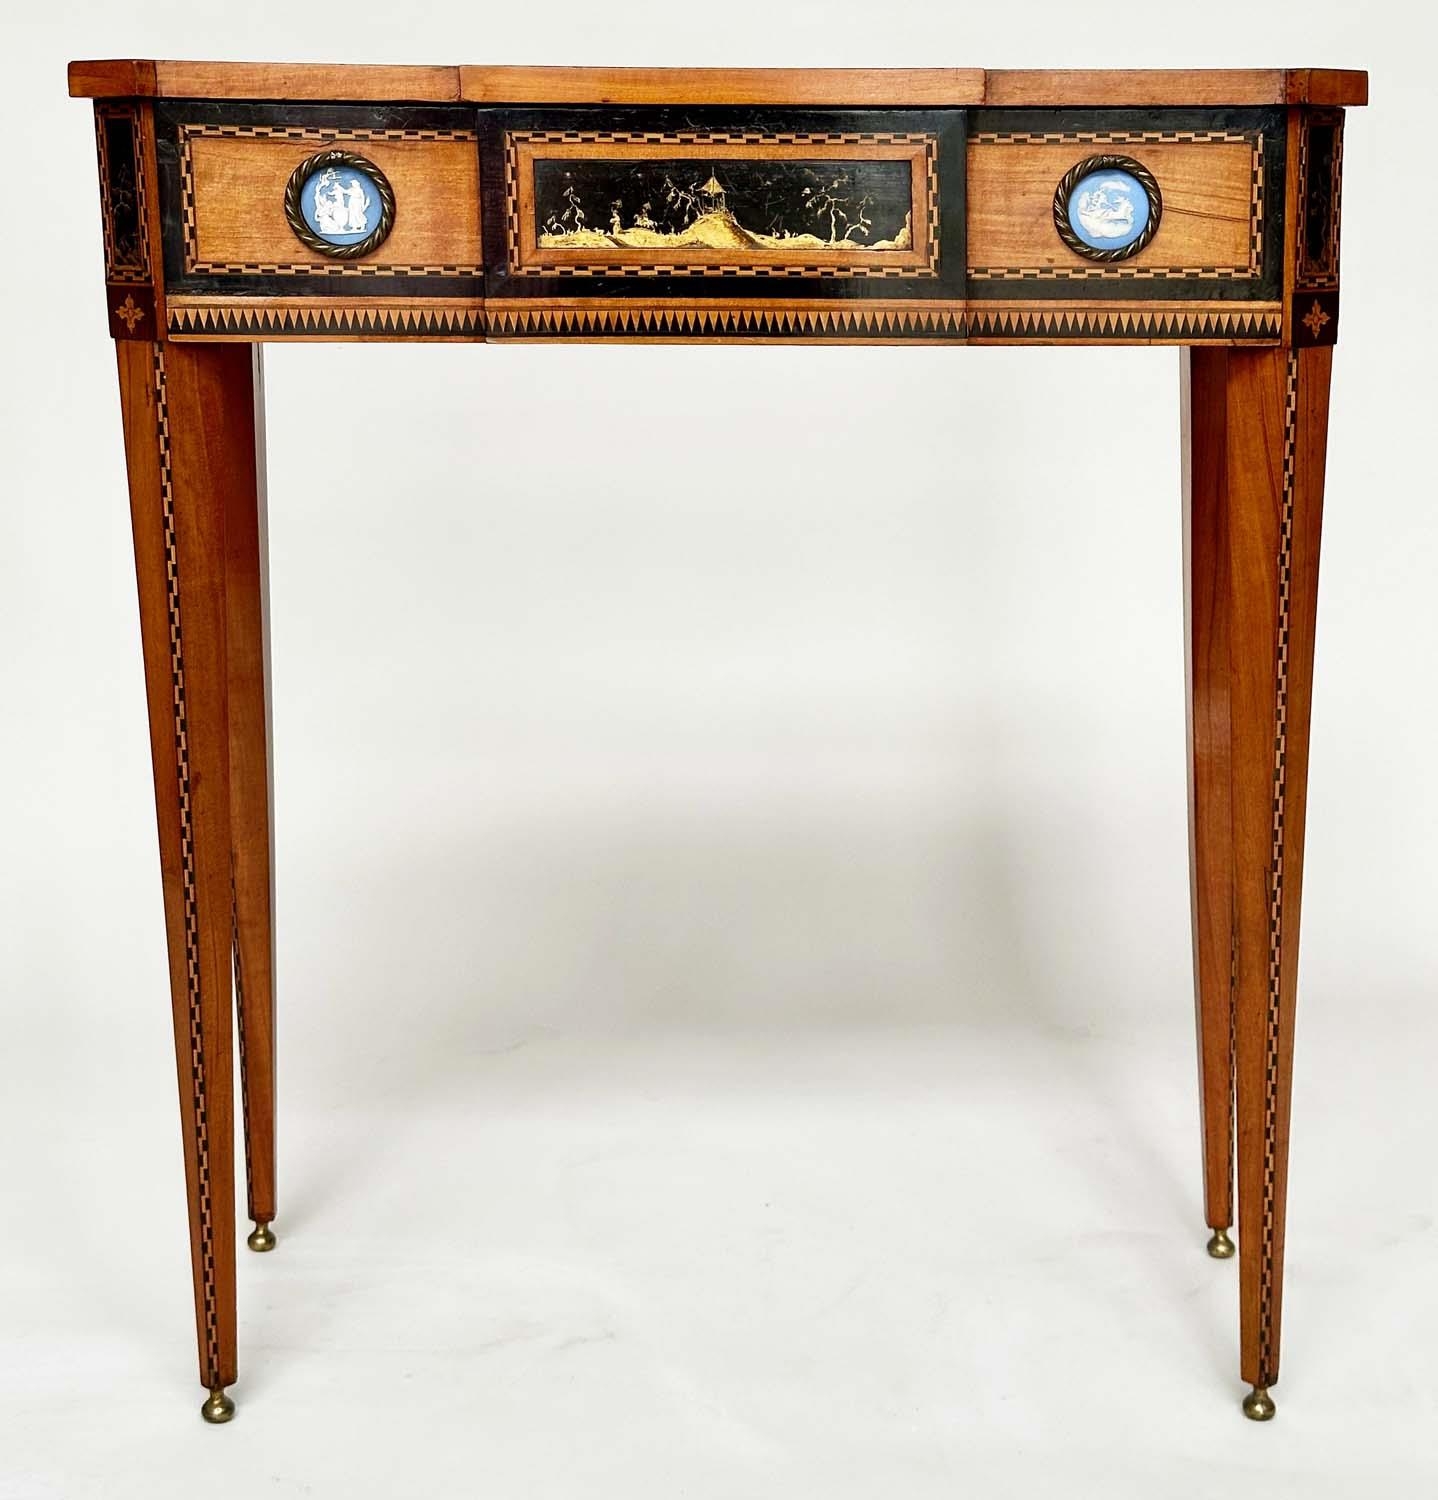 DUTCH HALL TABLE, early 19th century satinwood and ebony of breakfront form with full width frieze - Image 2 of 8